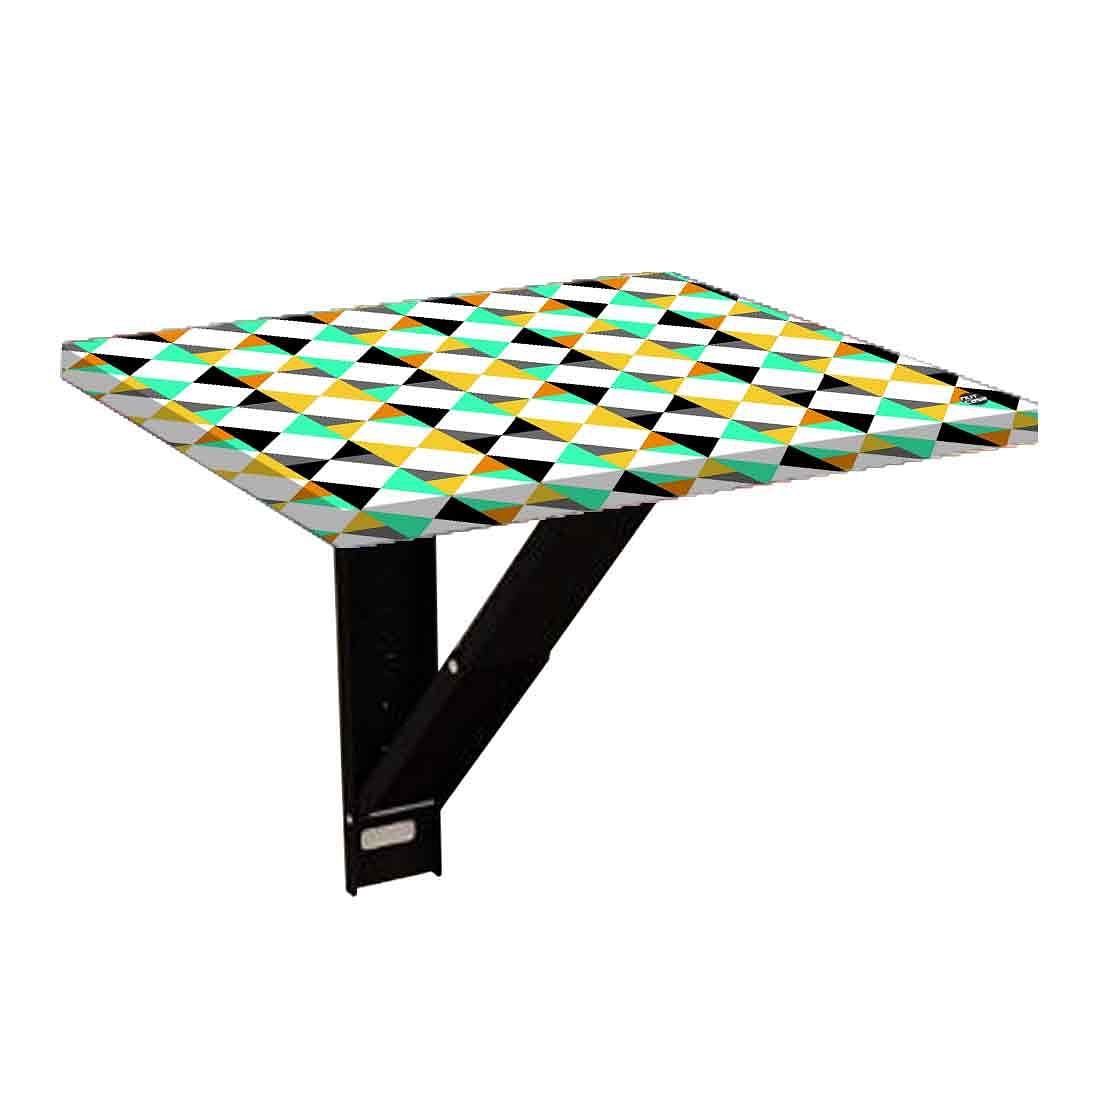 Folding Side Table for Bedroom - Colorful Diamond Pattern Nutcase